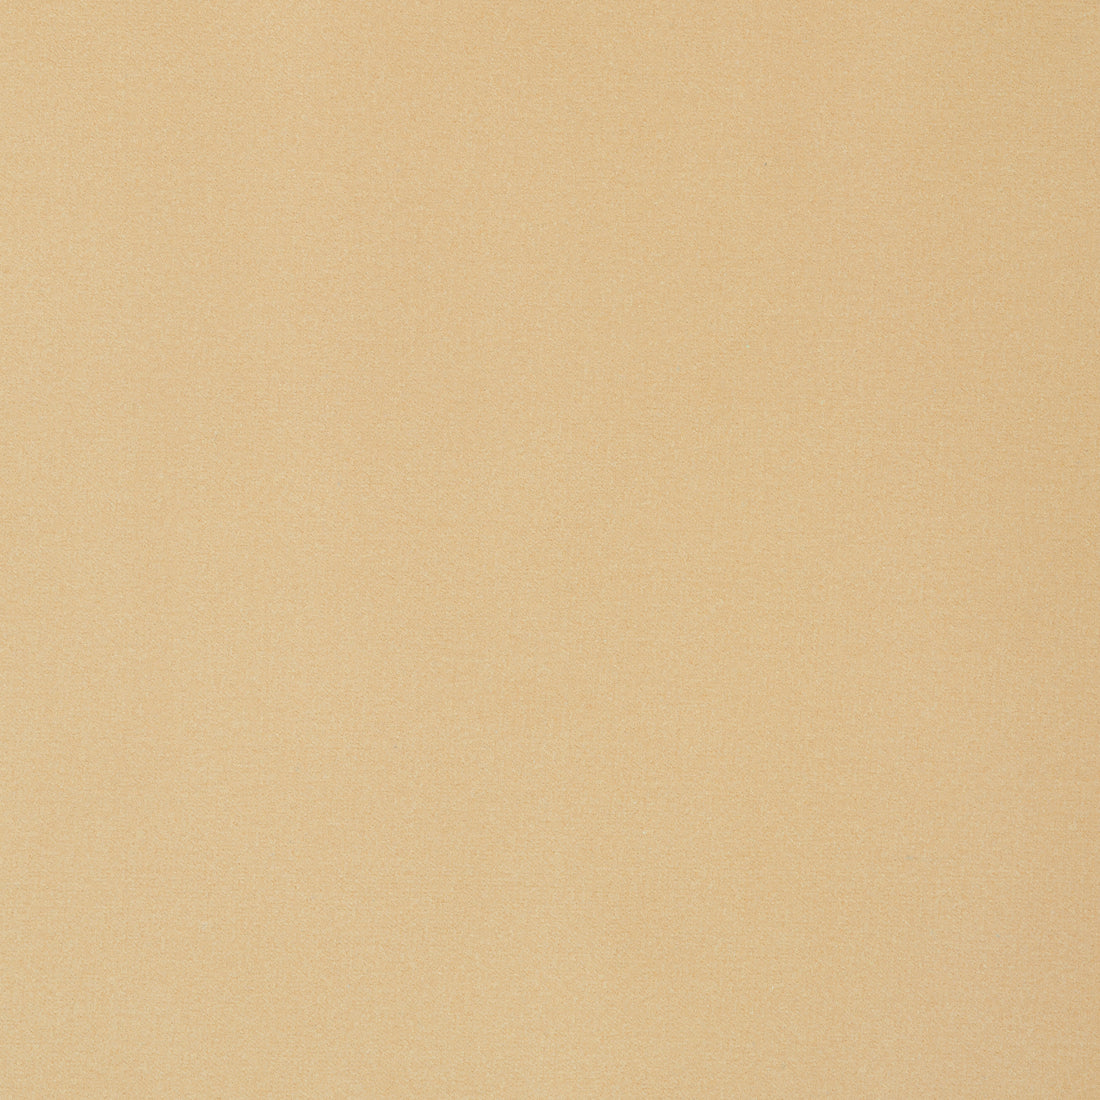 Lyra Velvet fabric in camel color - pattern number W8905 - by Thibaut in the Lyra Velvets collection